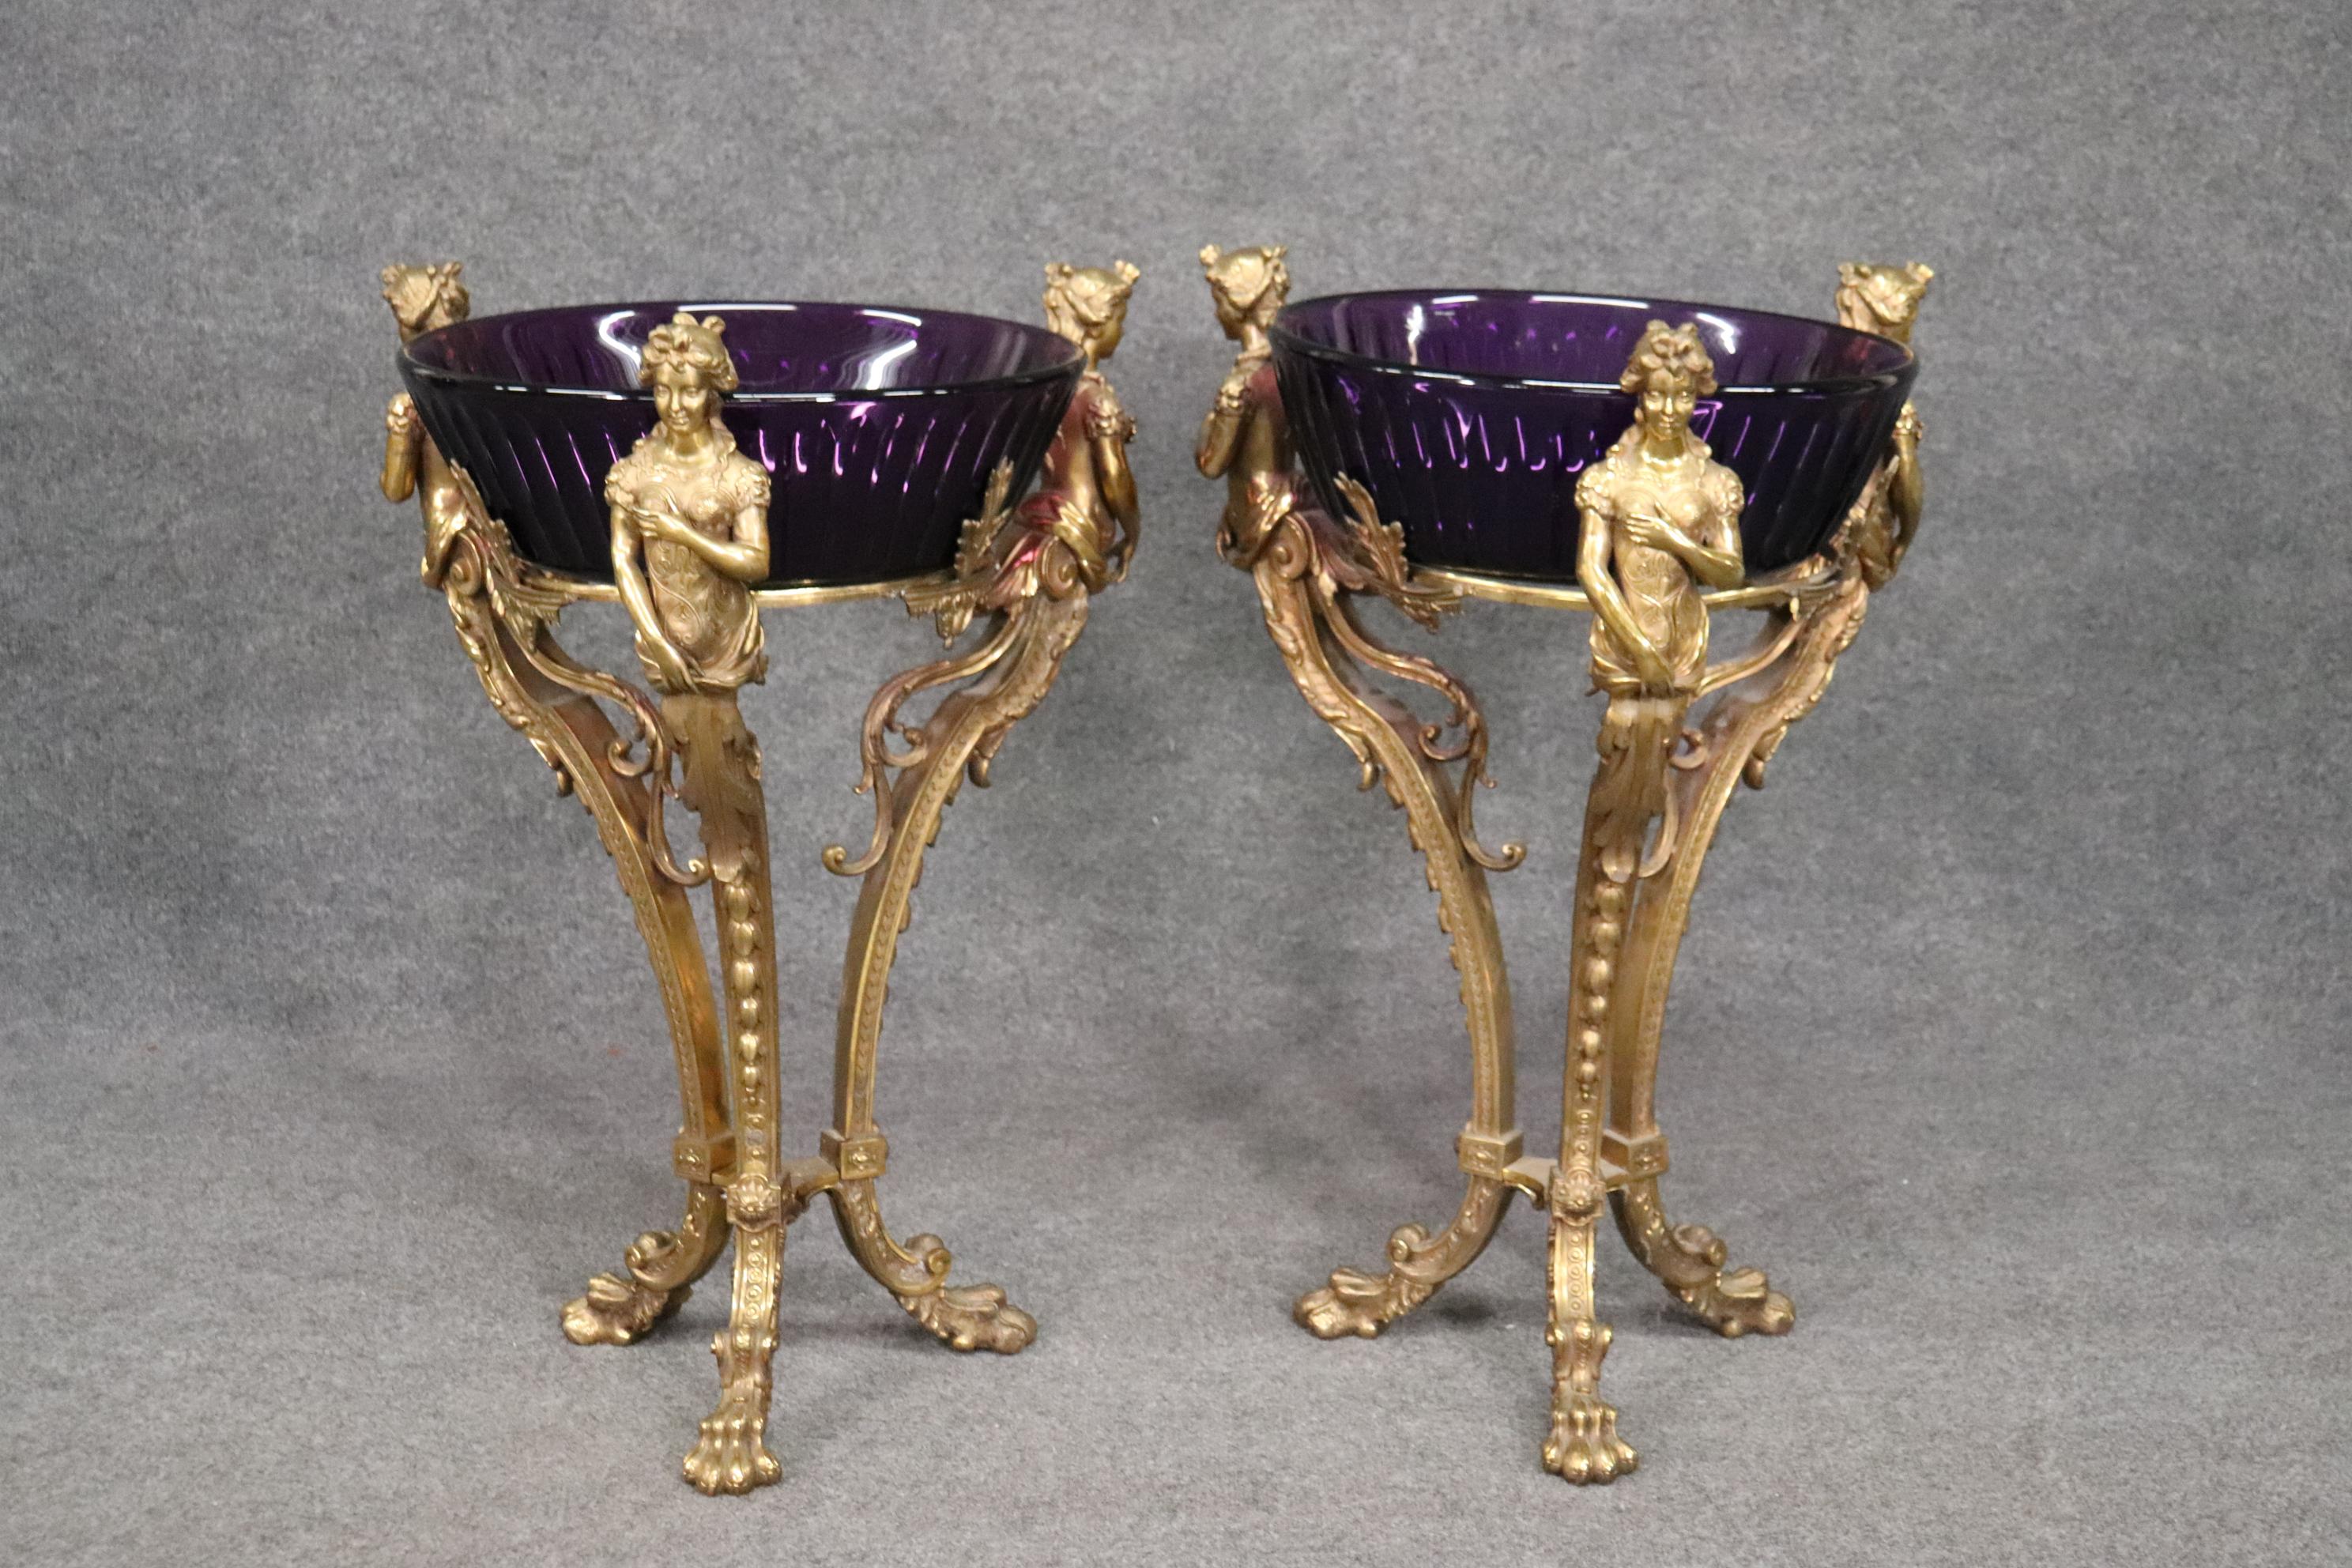 This is a stunning pair of Russian solid bronze figural wone coolers or urns. They feature some of the most realistic and naturalistic bronze castings we have had in quite a long time. The castings are crisp and look absolutely realistic. The